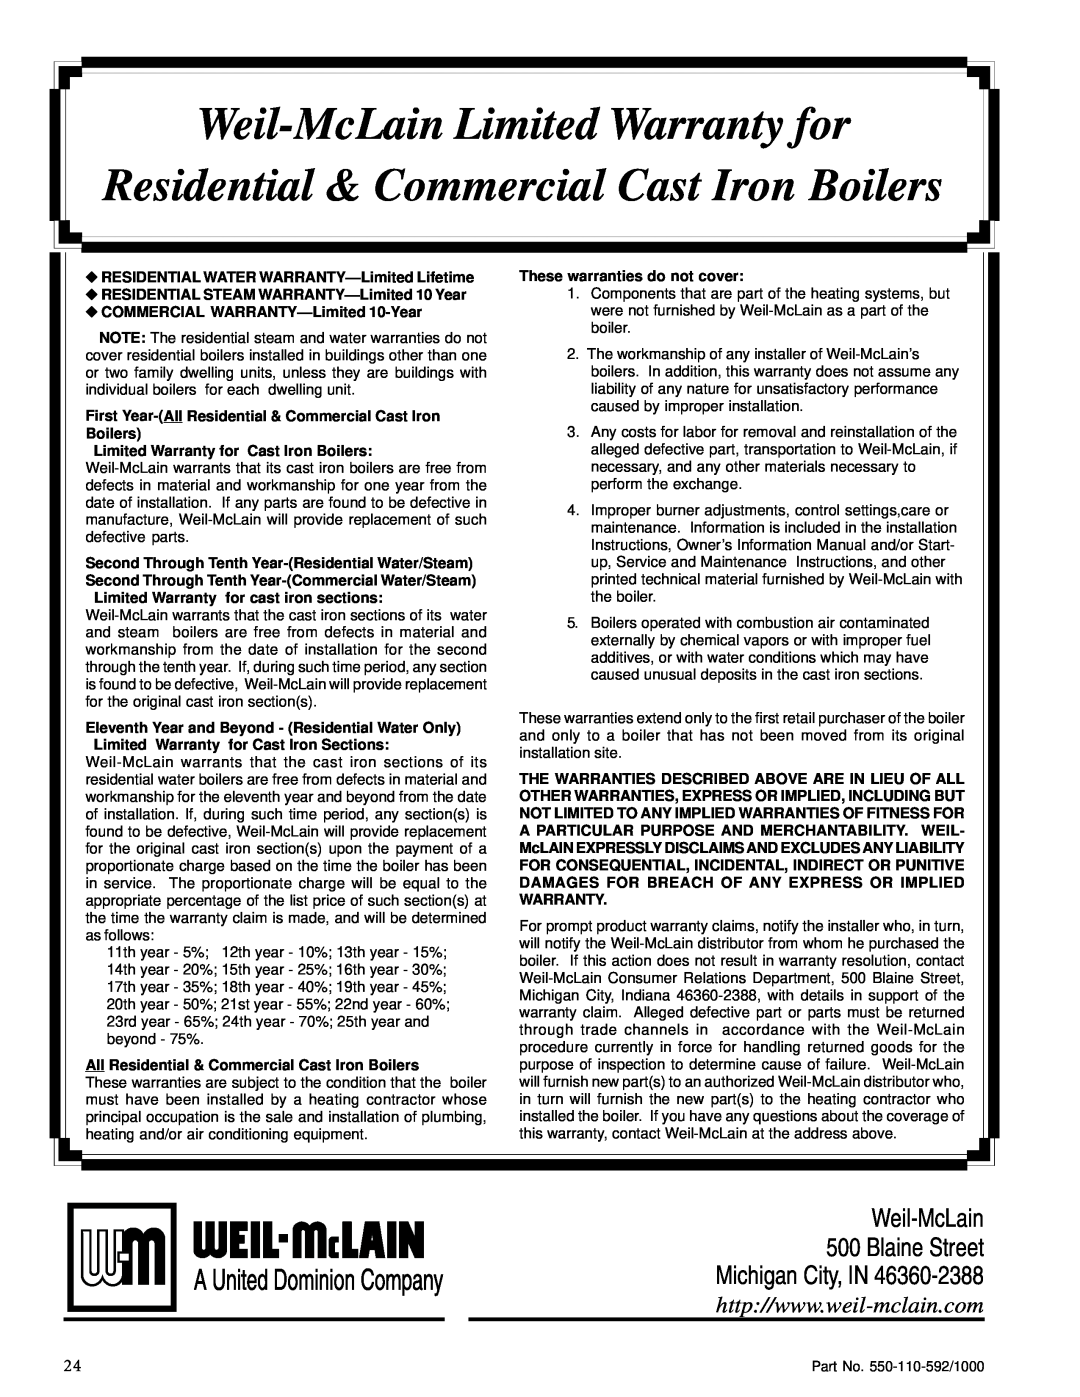 Weil-McLain PFG Weil-McLainLimited Warranty for, Residential & Commercial Cast Iron Boilers, These warranties do not cover 